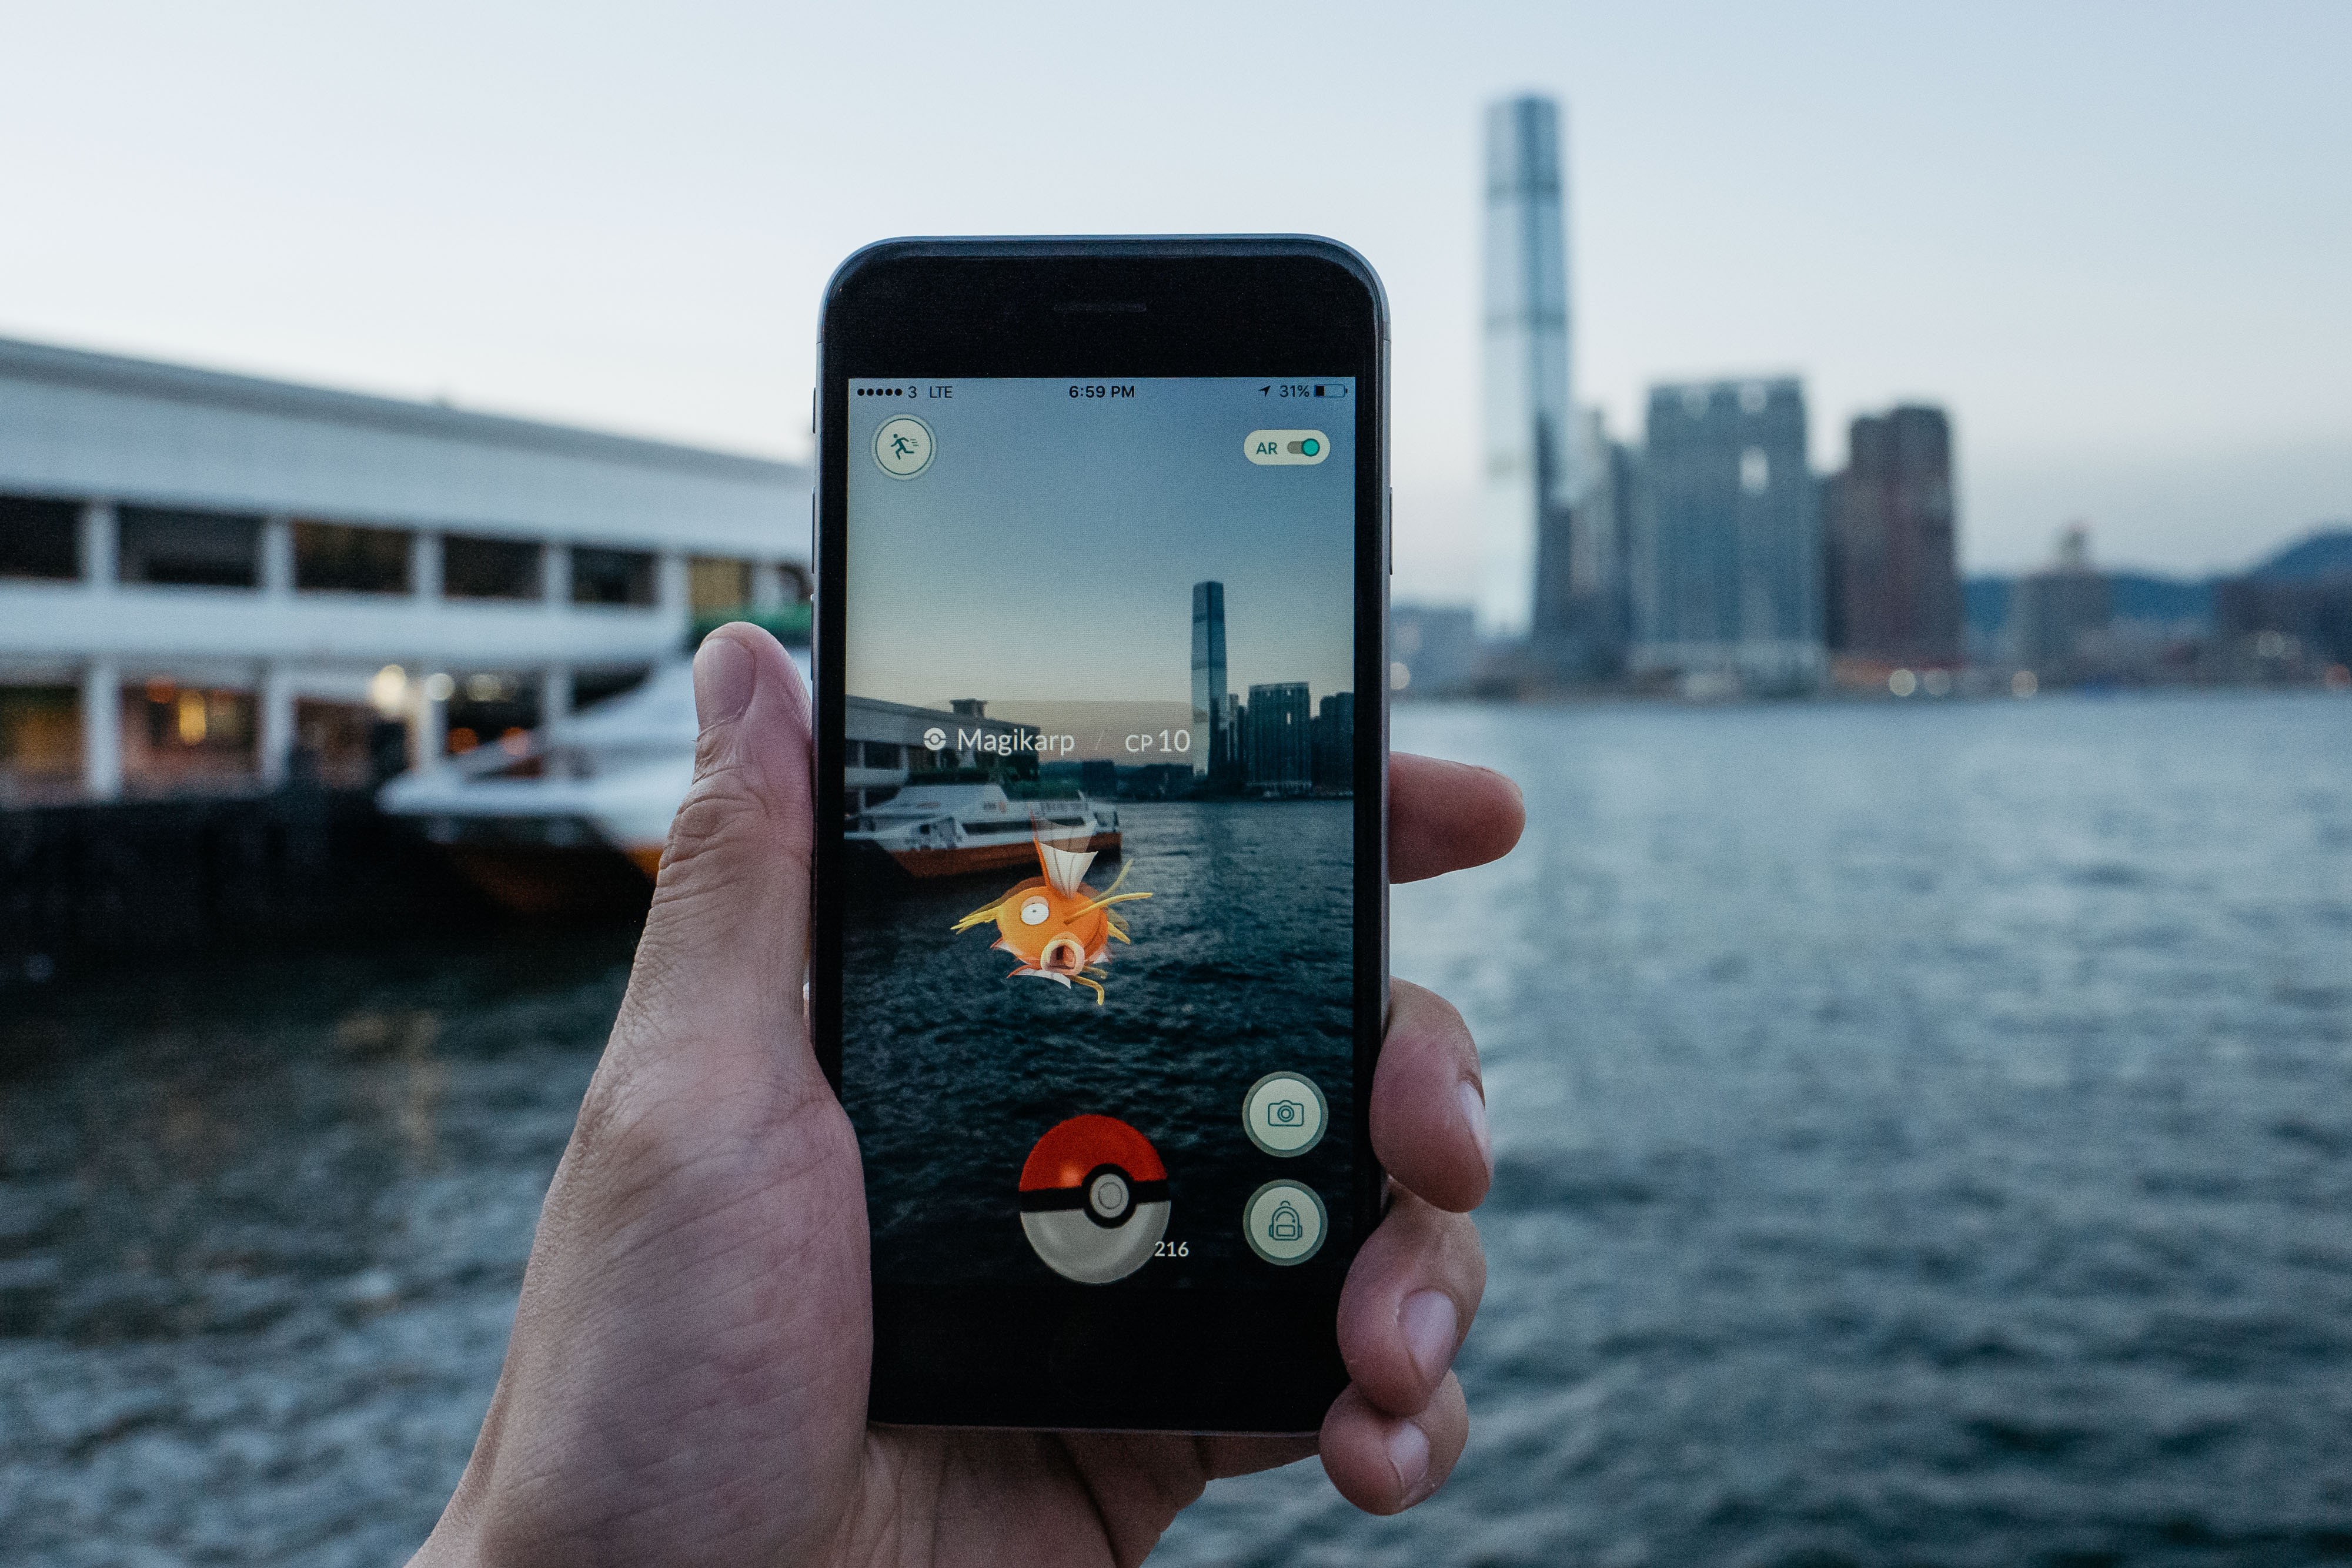 The Magikarp character from Pokemon Go is seen on a smartphone in Hong Kong in July 2016. Photo: Bloomberg